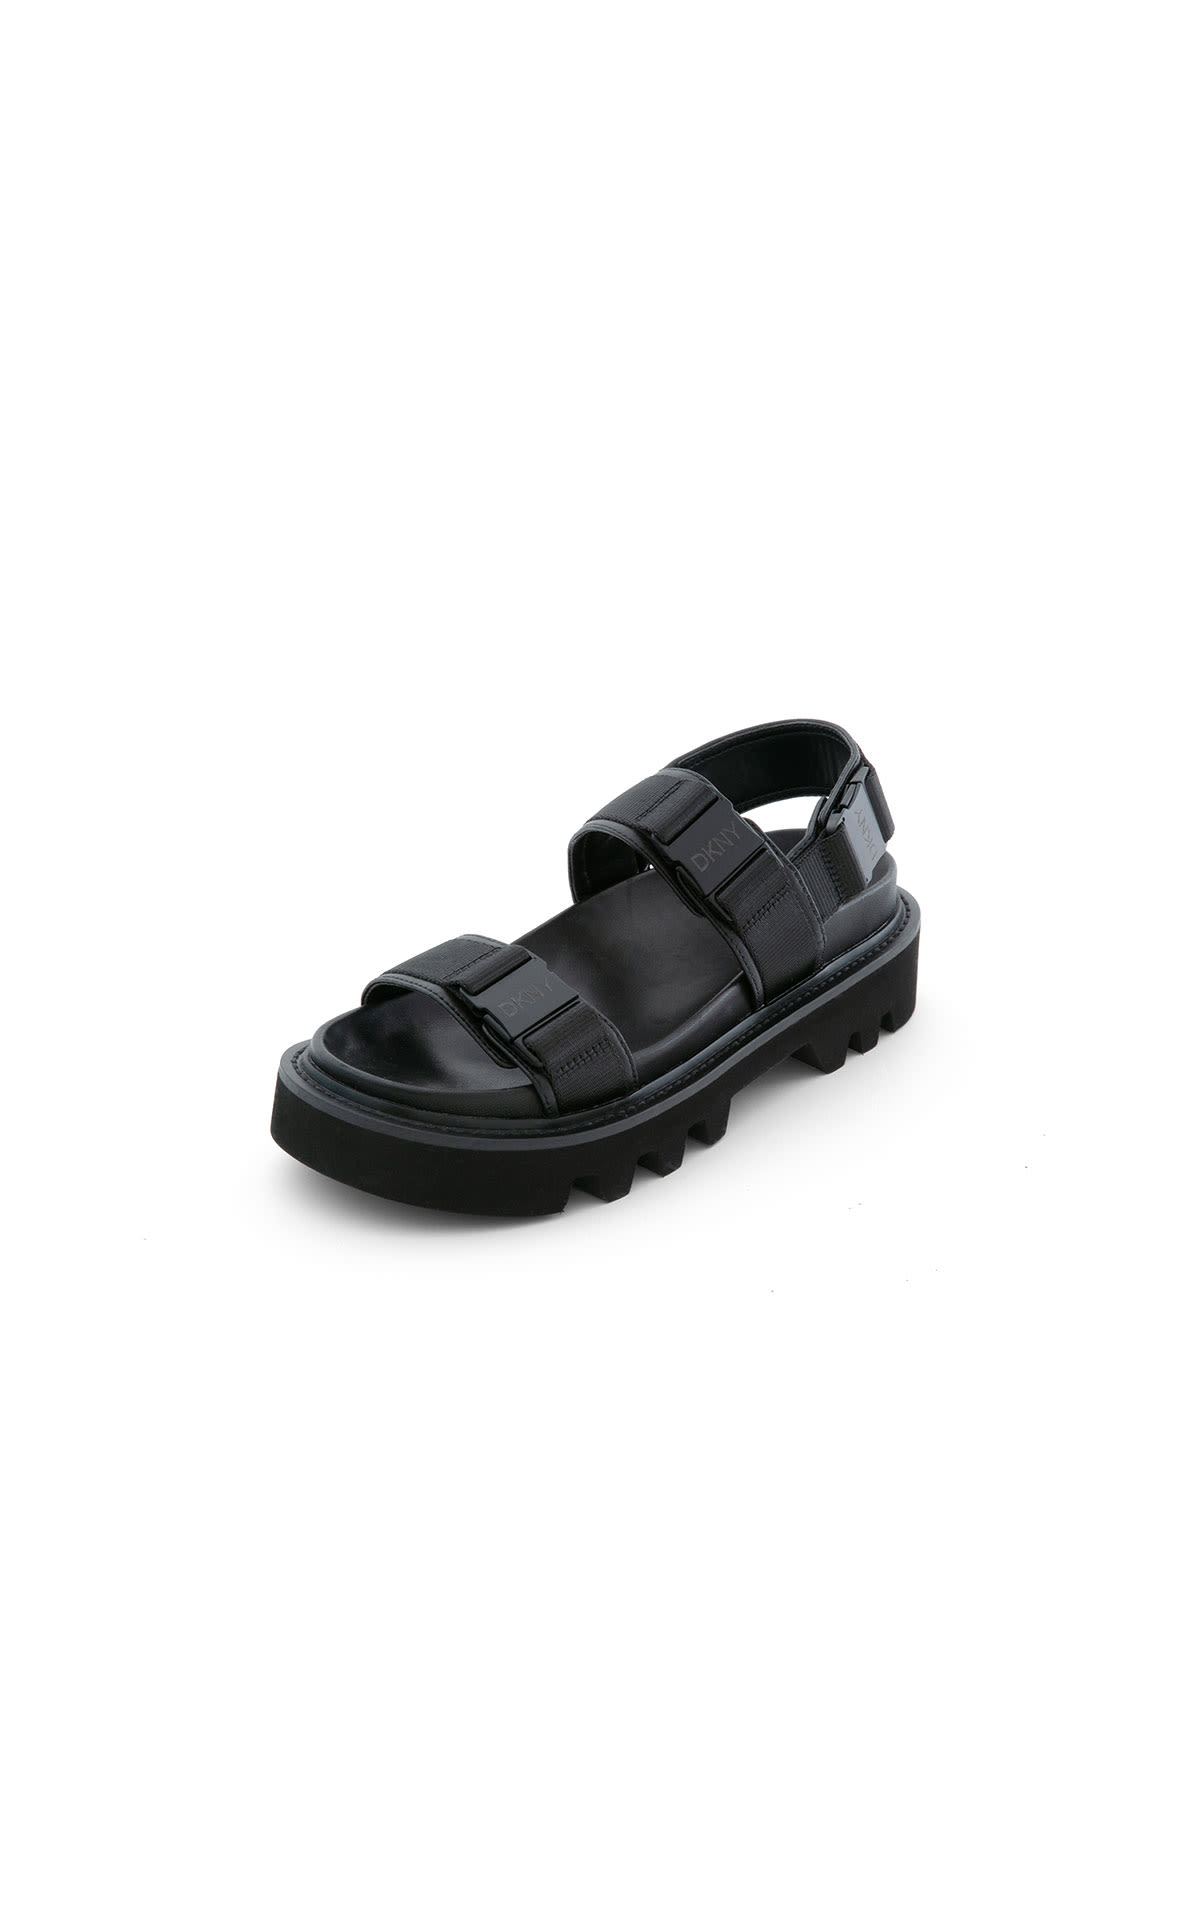 DKNY Black buckle sports sandal from Bicester Village